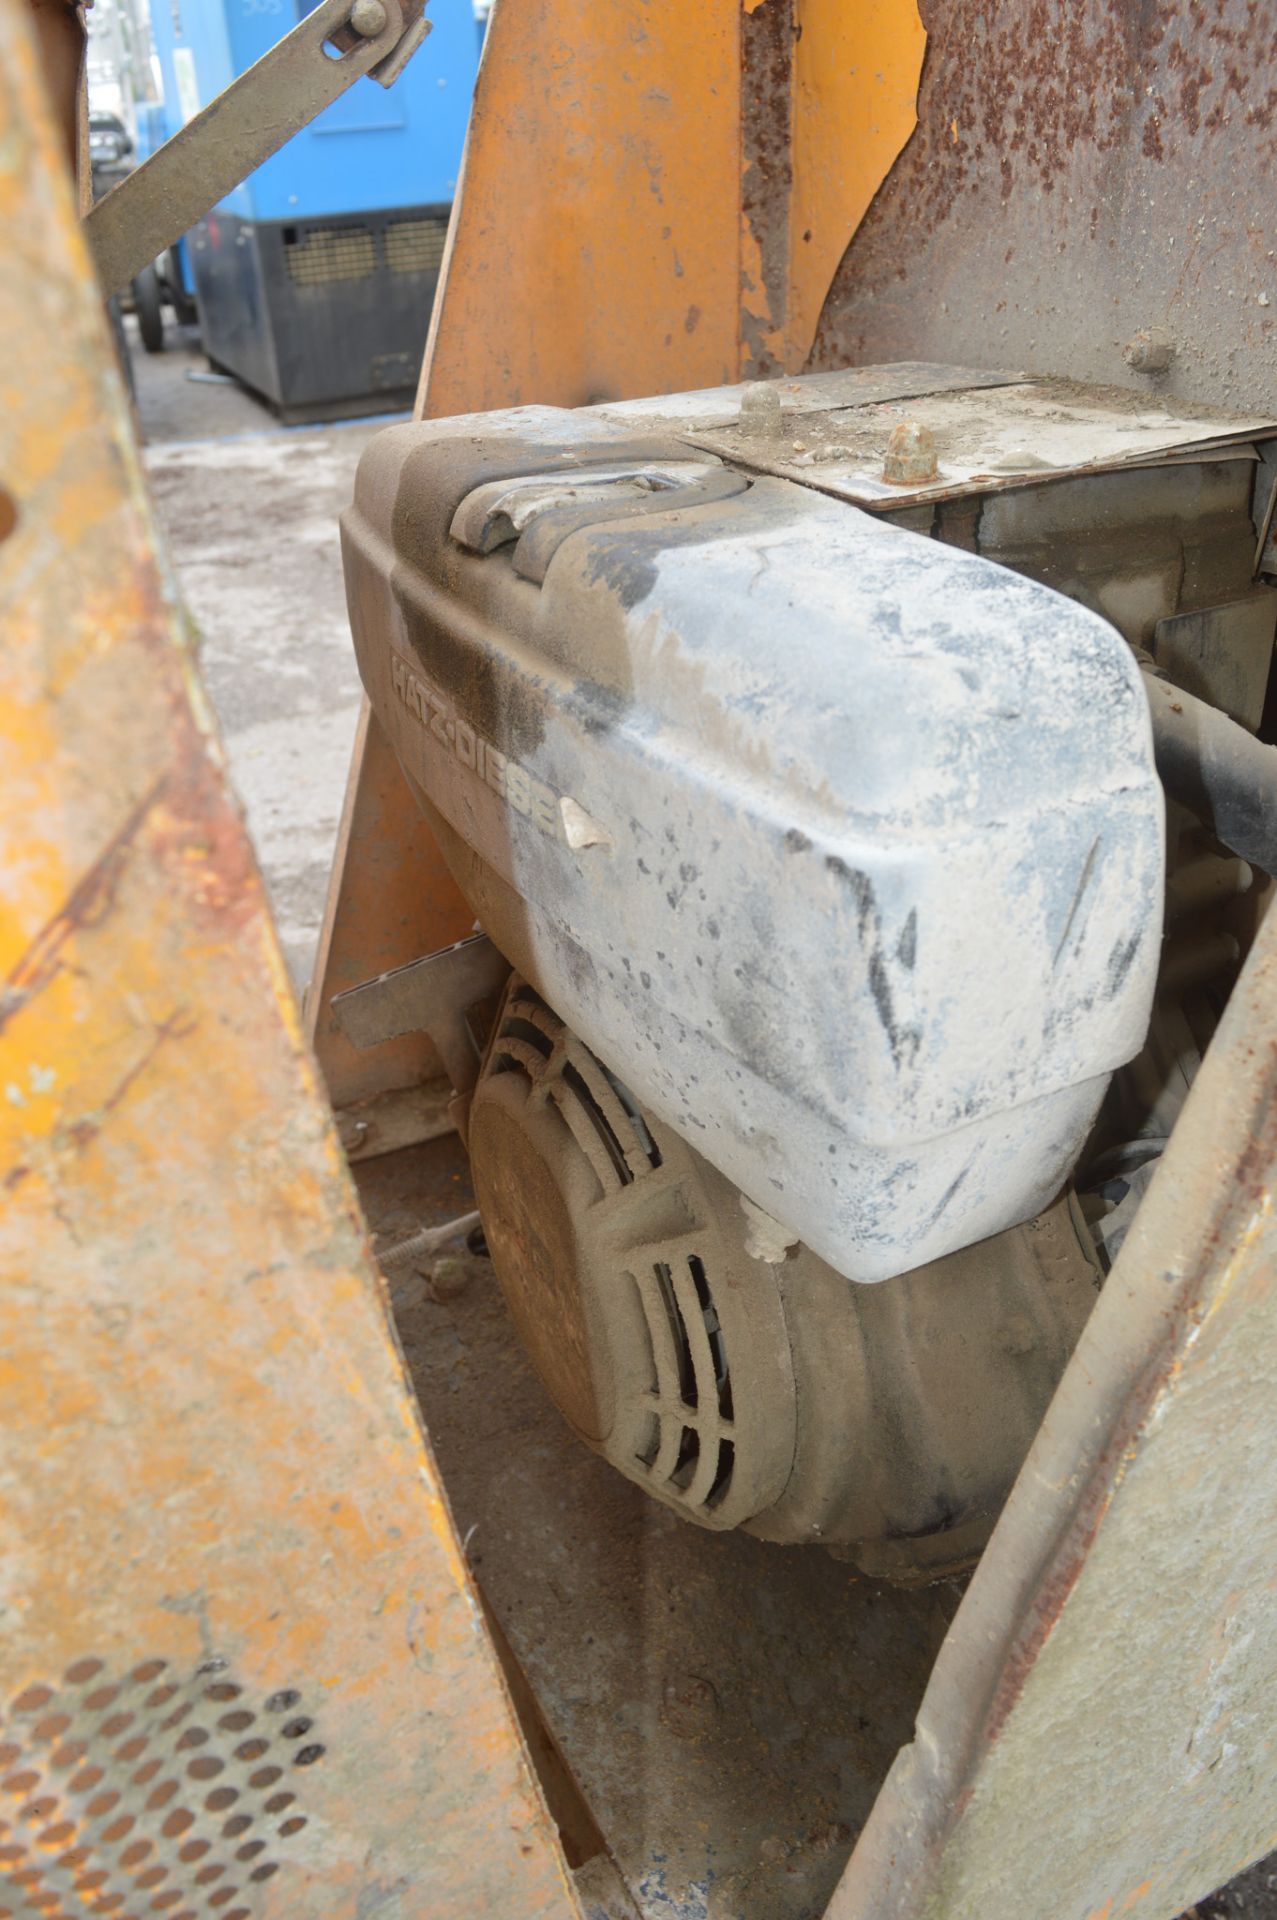 Benford diesel driven site mixer 1365 ** Parts missing ** - Image 3 of 3